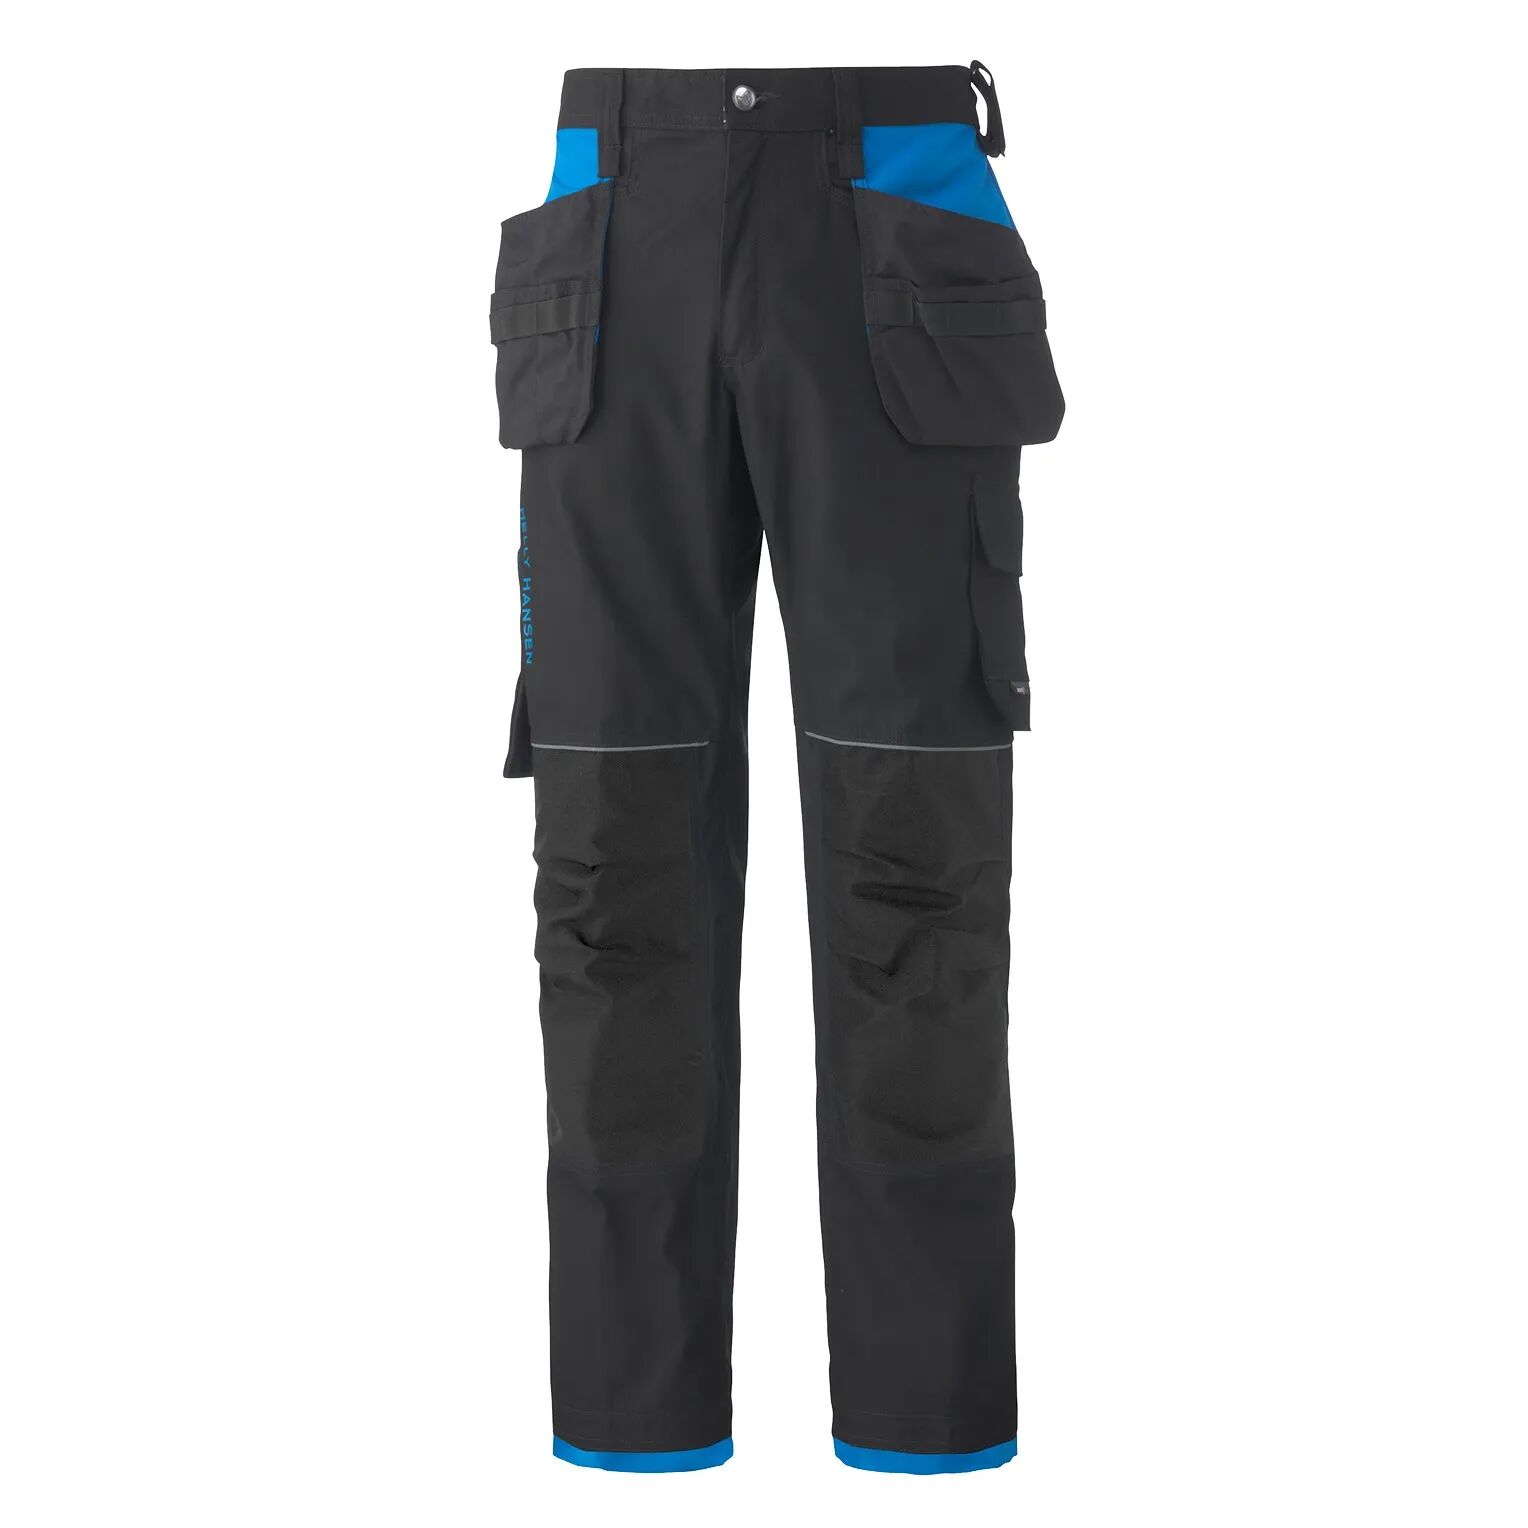 HH Workwear Helly Hansen WorkwearChelsea Durable Reflective Construction Pants Grey 44/32